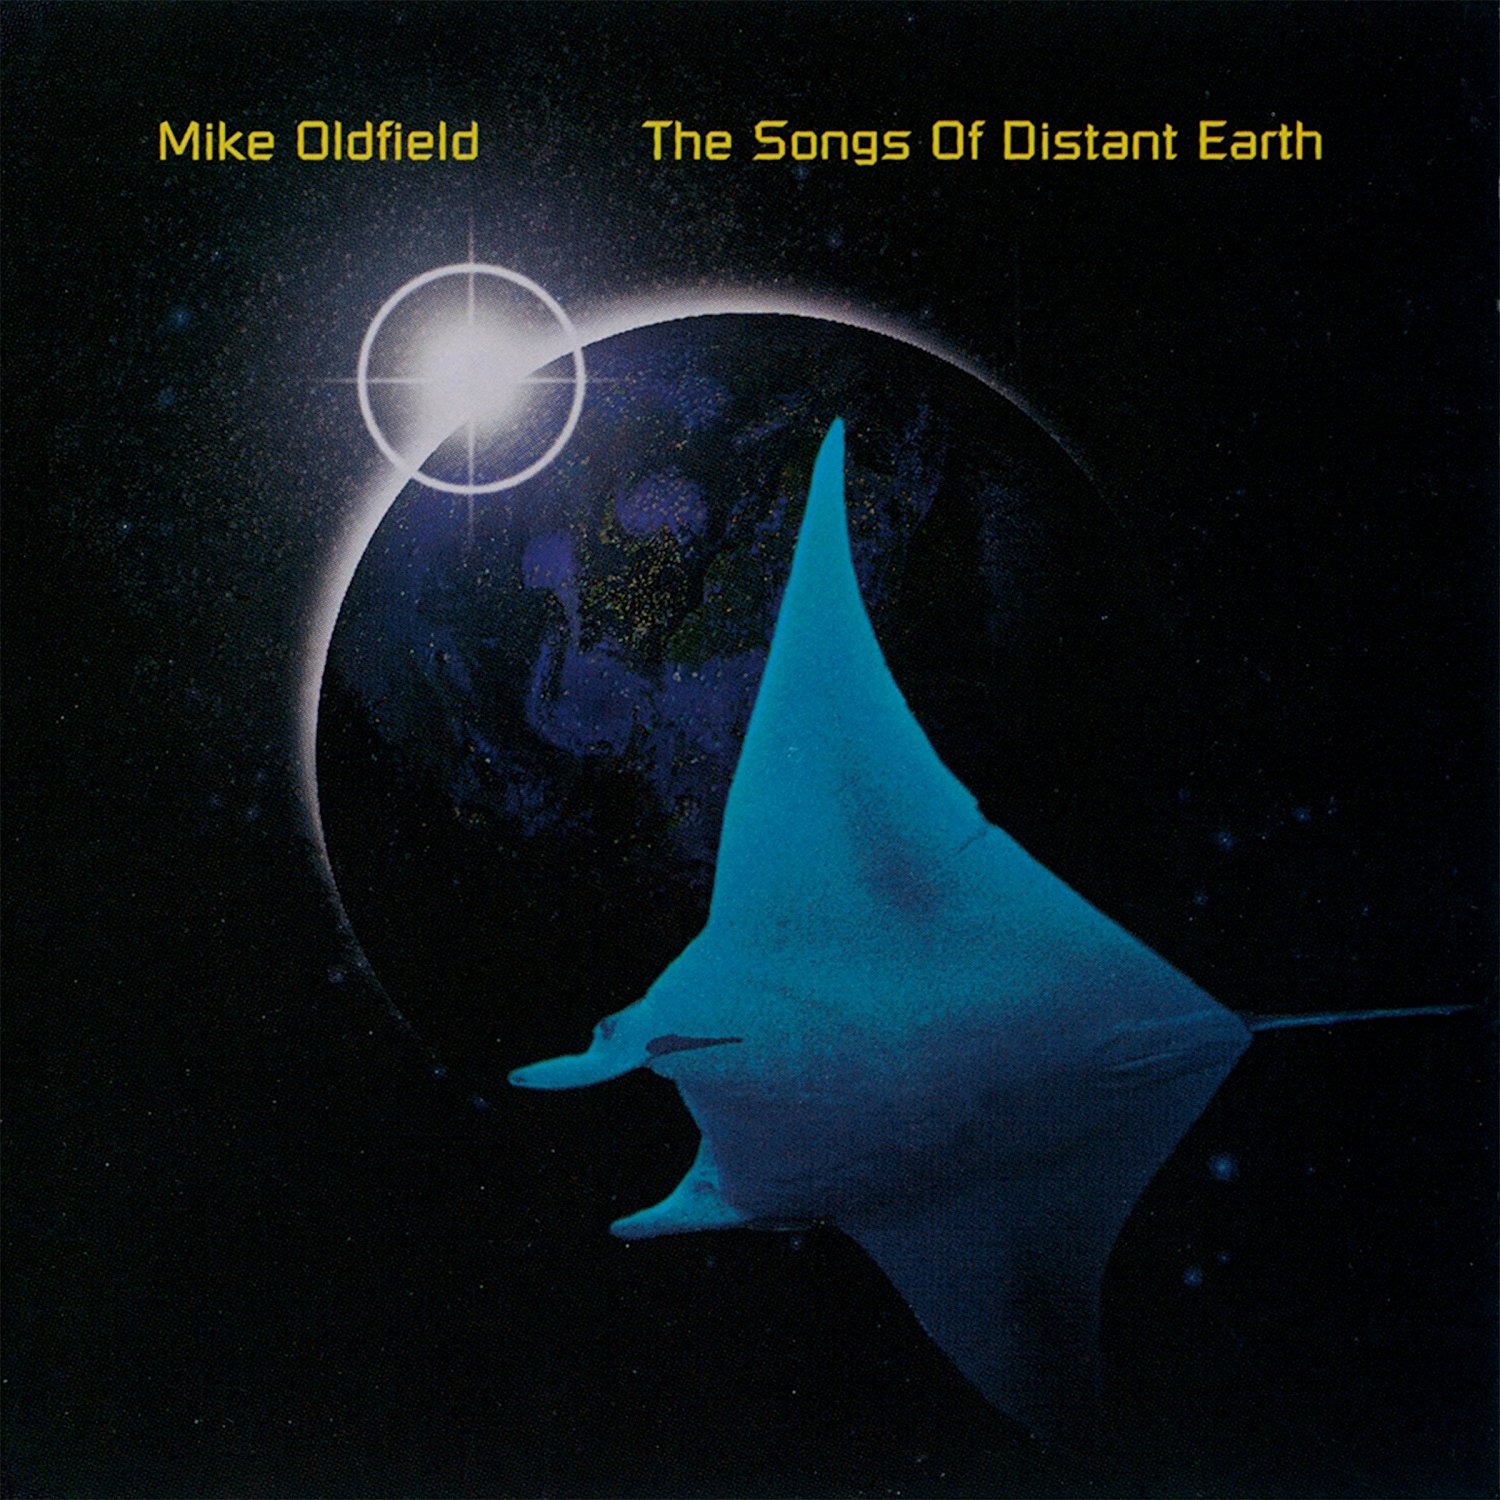 The Songs Of Distant Earth - Vinyl | Mike Oldfield image